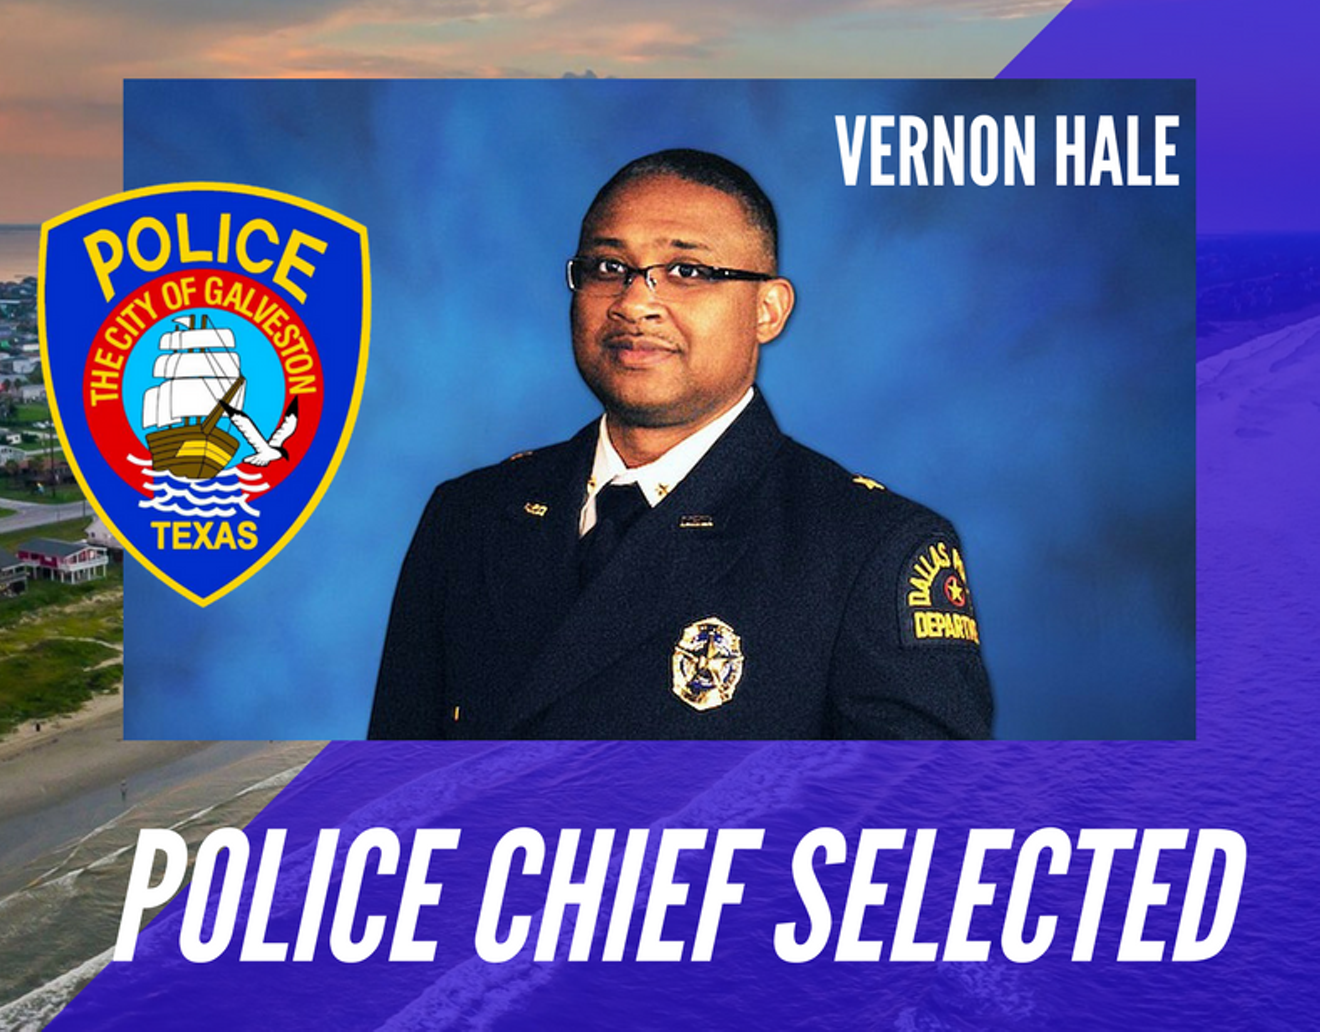 Vernon Hale, longtime deputy chief of the Dallas Police Department, is headed for the beaches of Galveston.